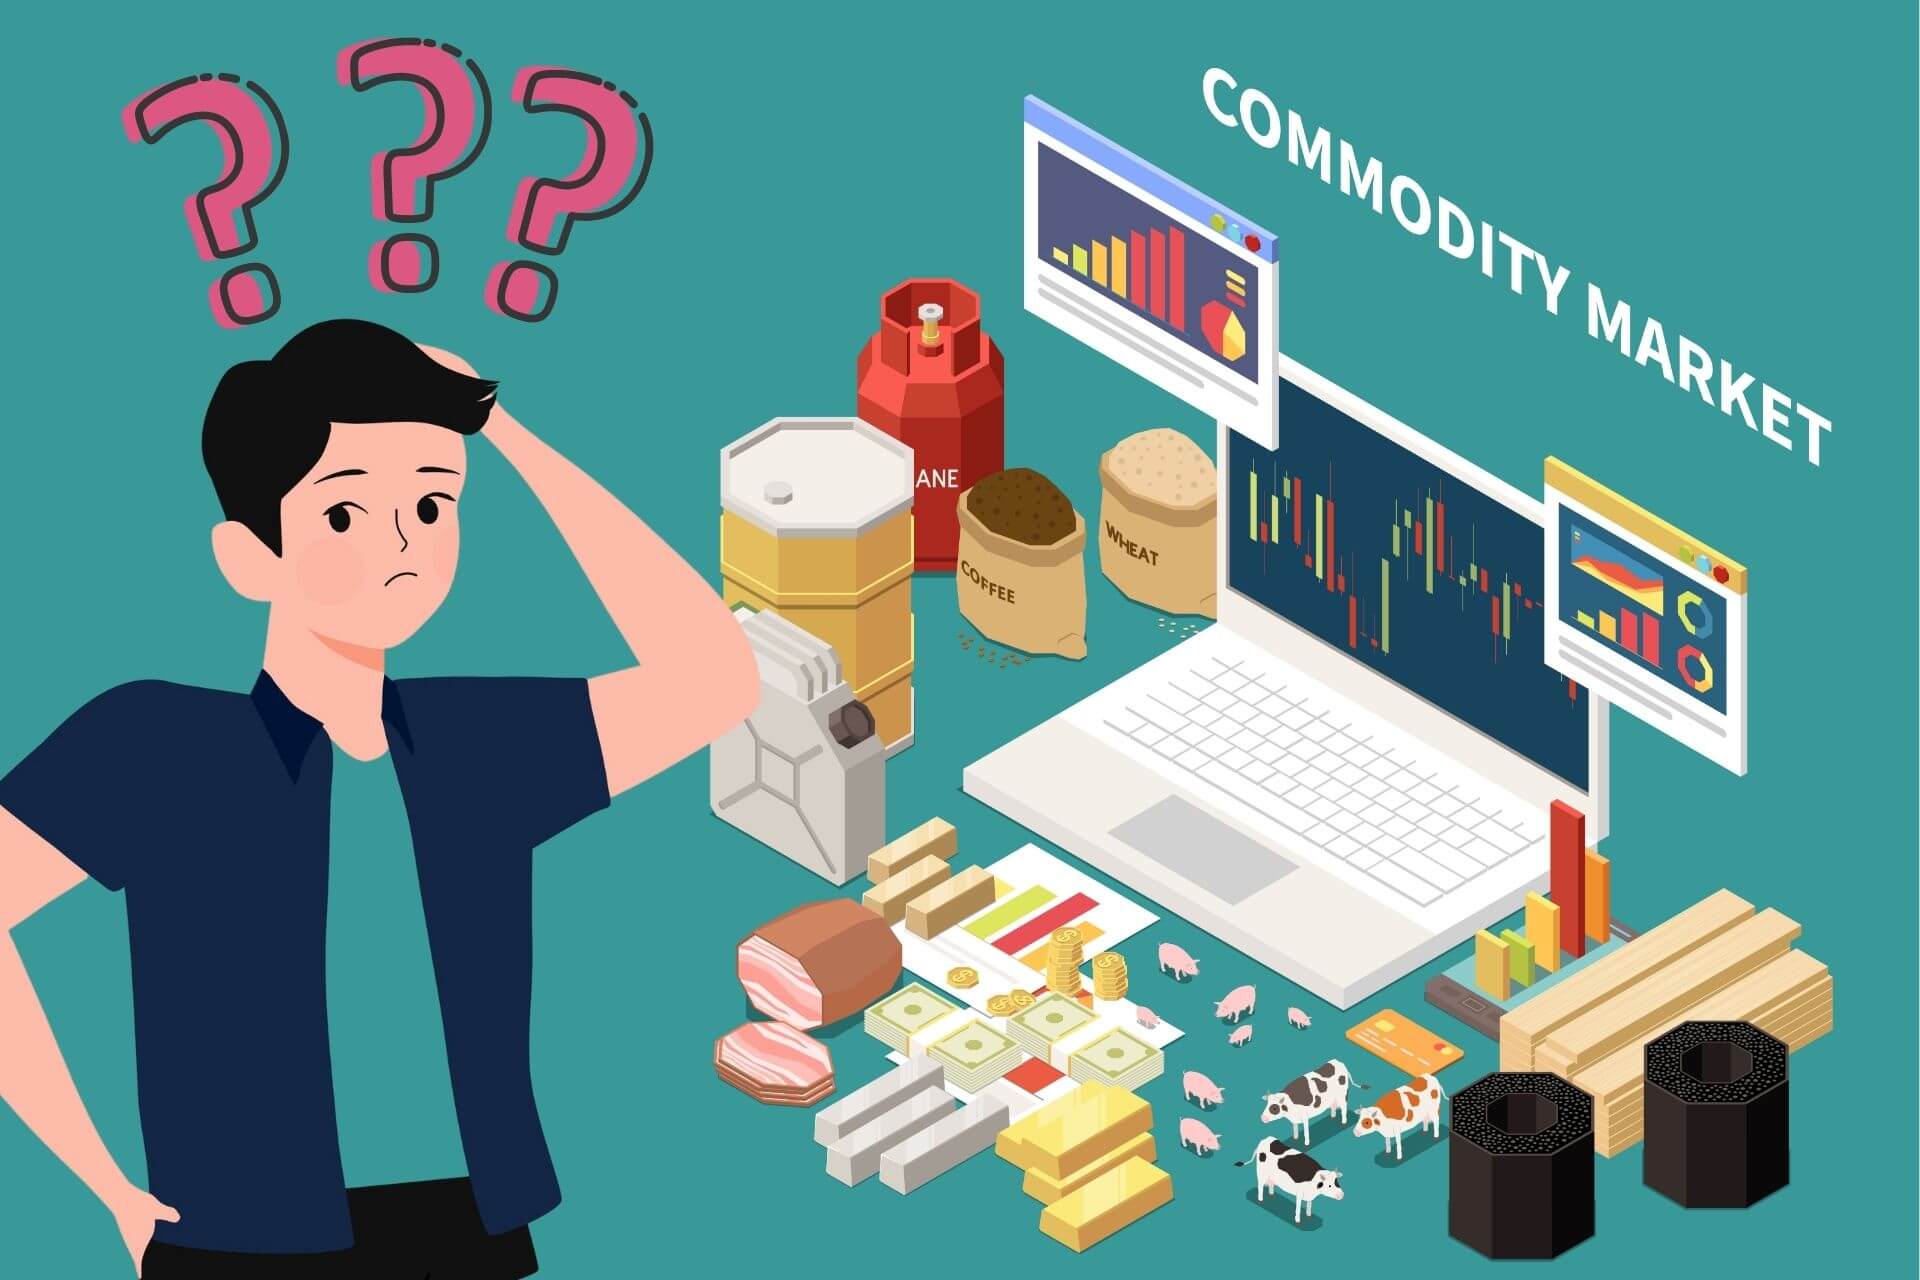 Commodity Trading for Beginners: Gold, Oil, and More